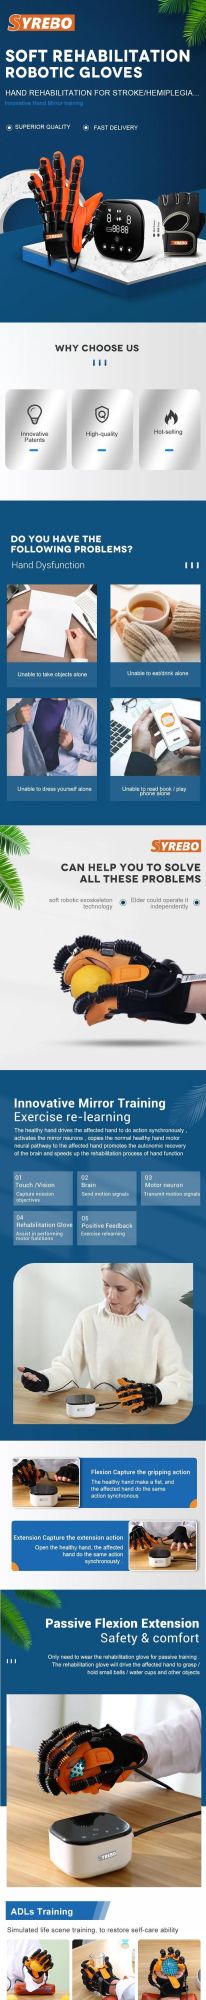 New Invention Finger Resistance Bands Training Physiotherapy Equipment Rehabilitation Advanced Physiotherapy Hand Rehabilitation Robot Rehabilitation